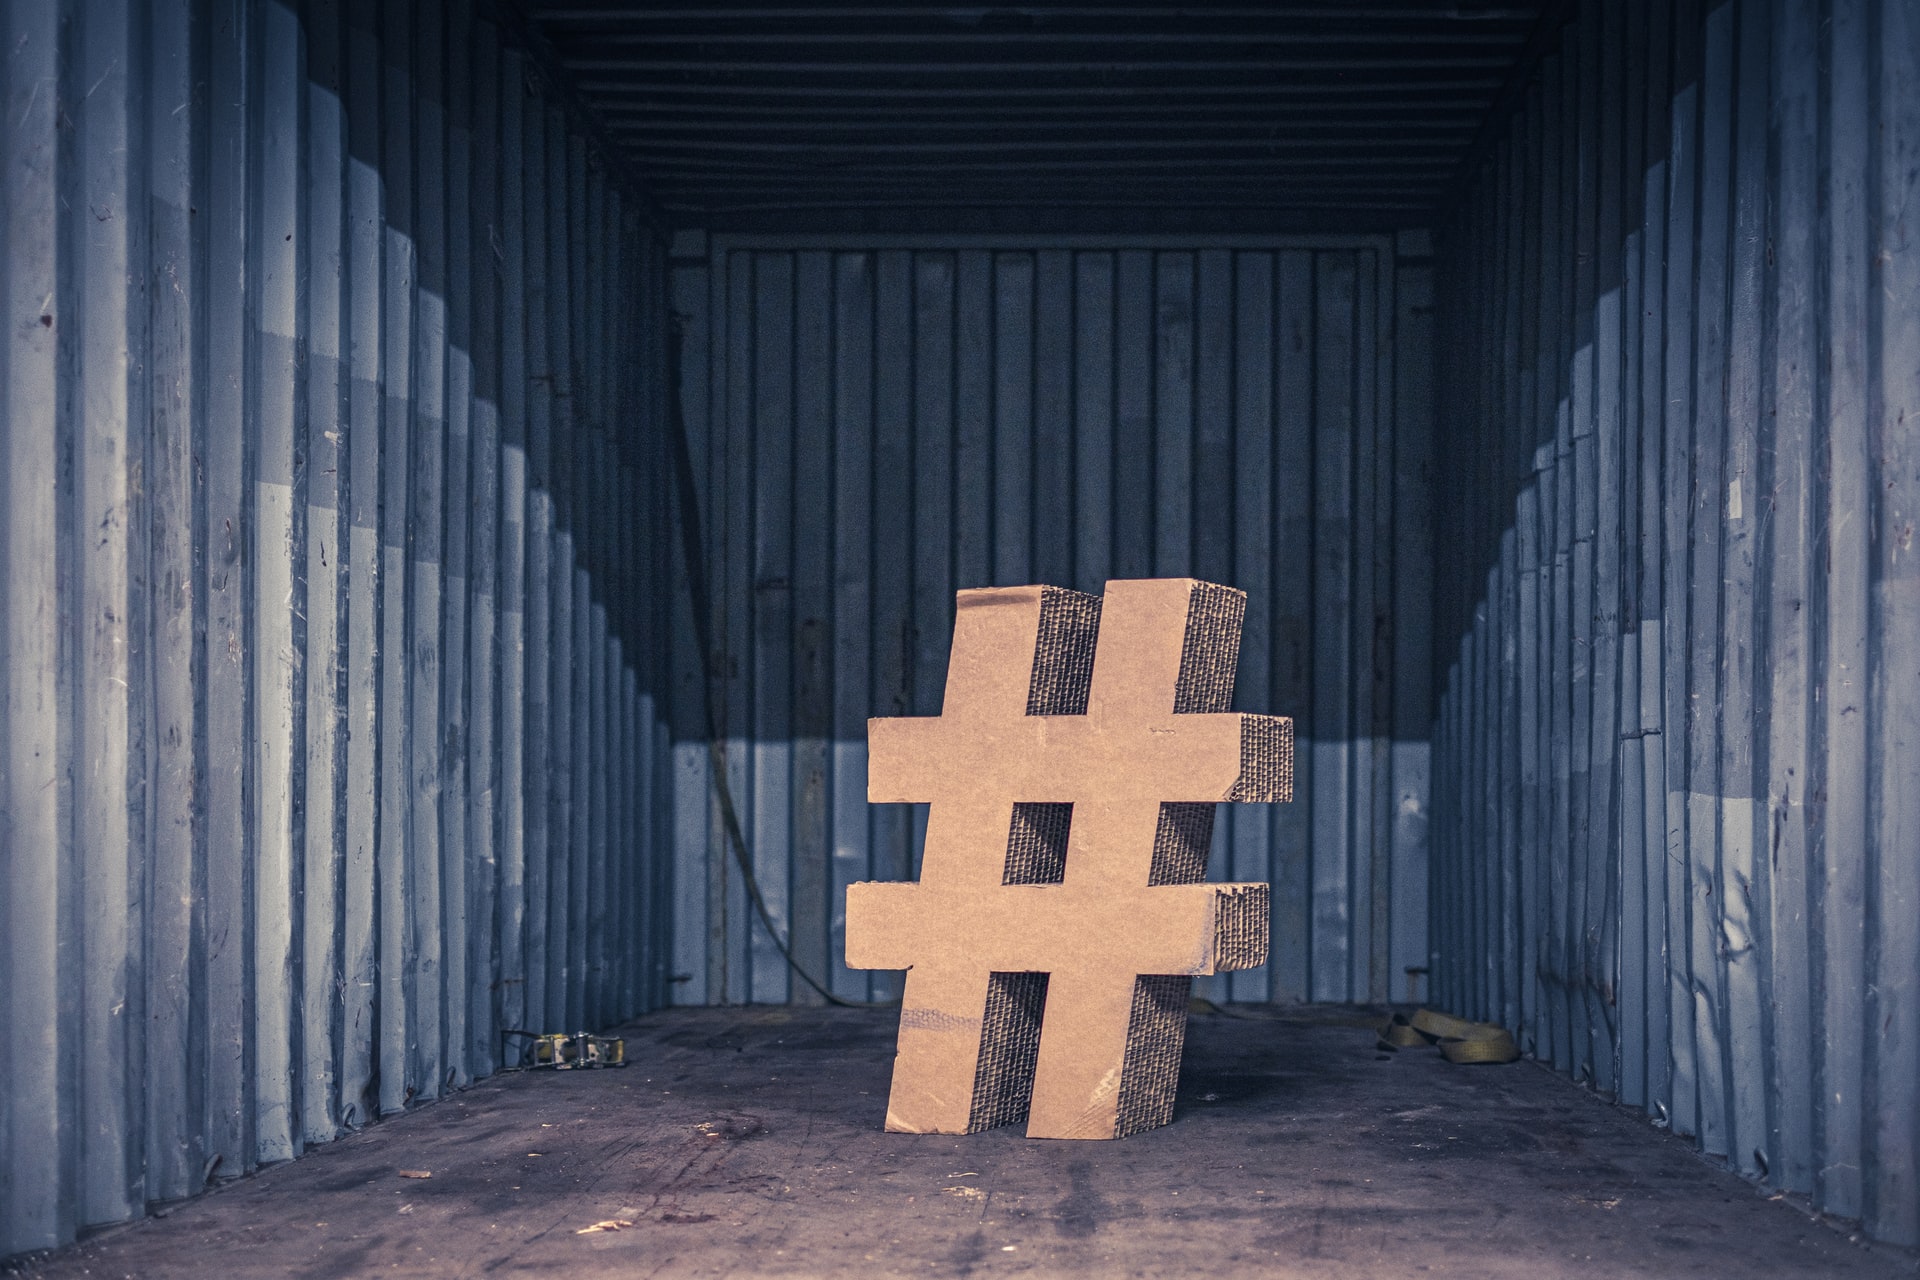 How to Use Social Media Hashtags (Effectively)